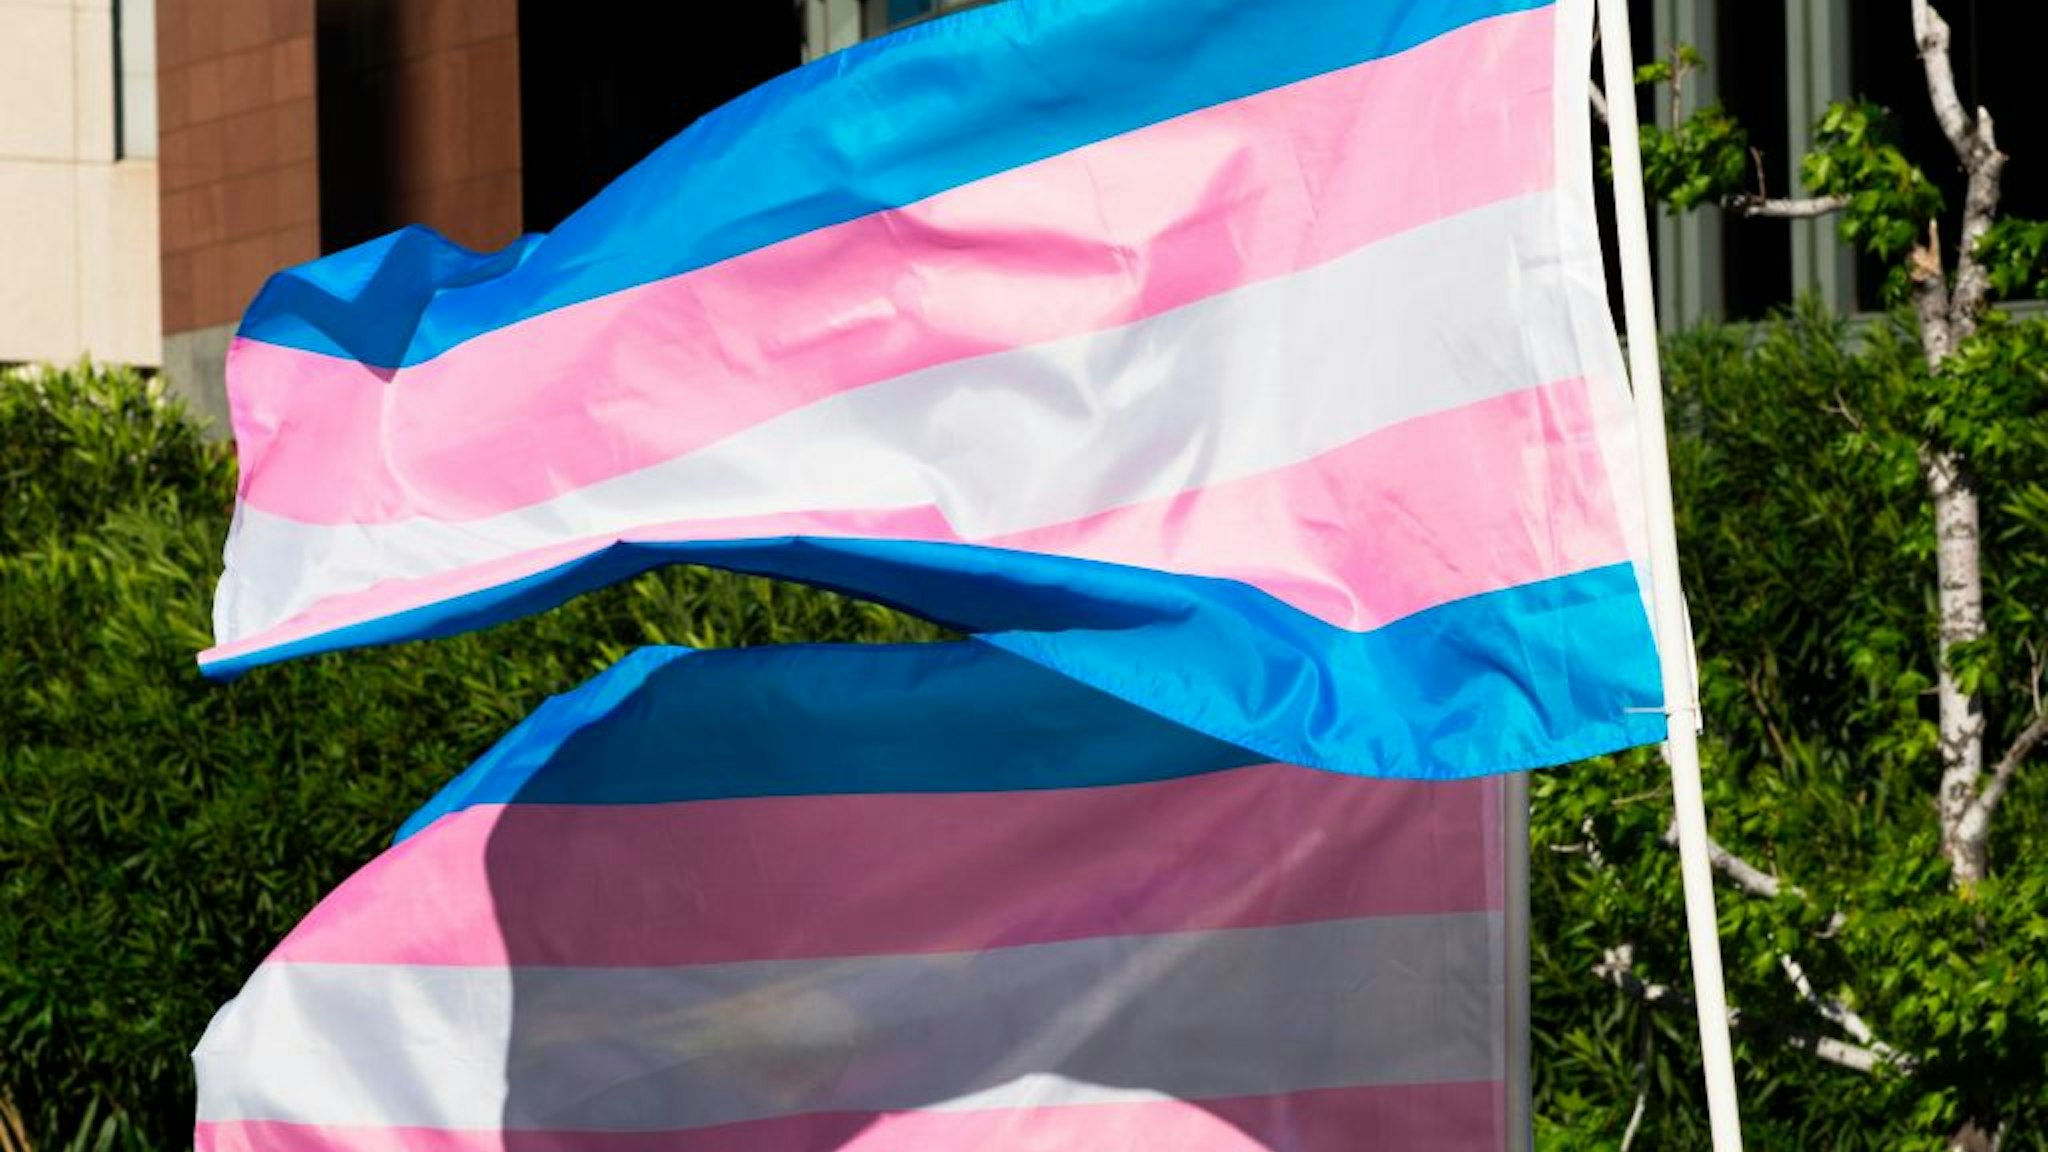 Trans pride flags flutter in the wind at a gathering to celebrate International Transgender Day of Visibility, March 31, 2017 at the Edward R. Roybal Federal Building in Los Angeles, California. International Transgender Day of Visibility is dedicated to celebrating transgender people and raising awareness of discrimination faced by transgender people worldwide.